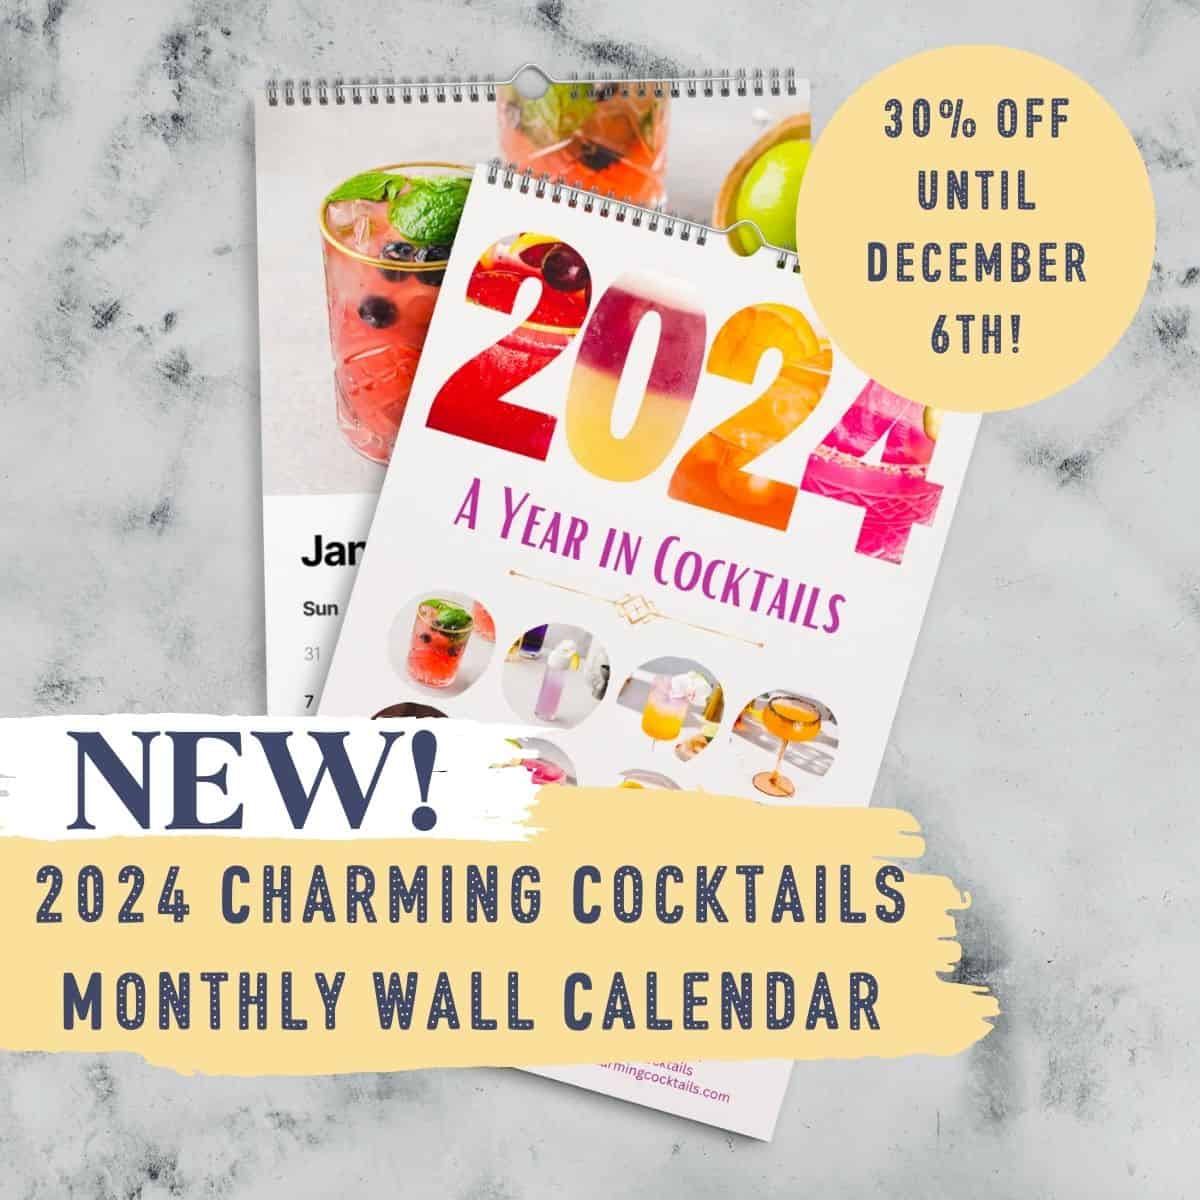 2024 Charming Cocktails Wall Calendar - 30% off until December 6th. Images of the calendar are on a marble countertop.